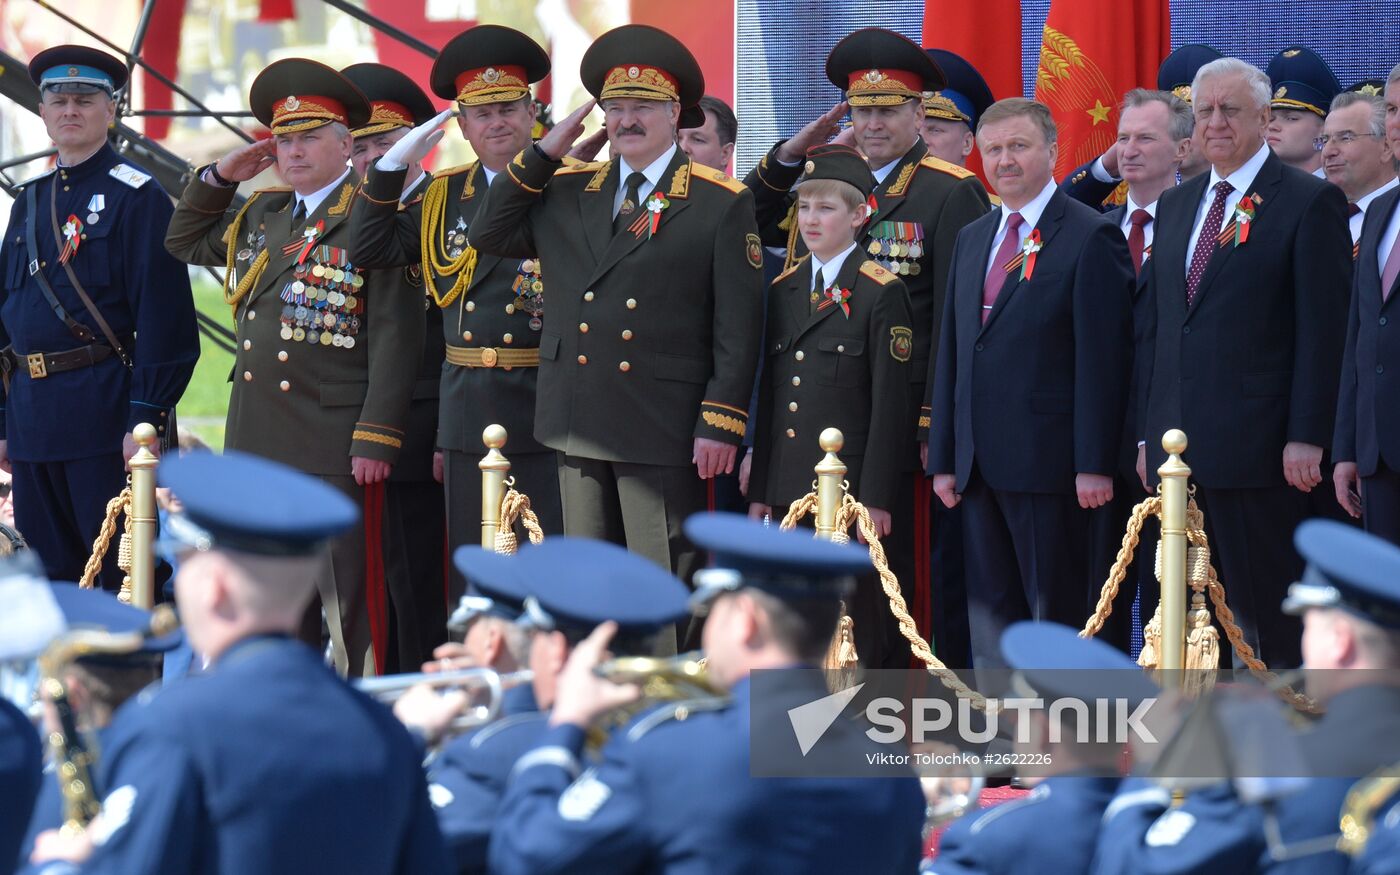 The Hero City of Minsk celebrates 70th anniversary of Victory in 1941-1945 Great Patriotic War